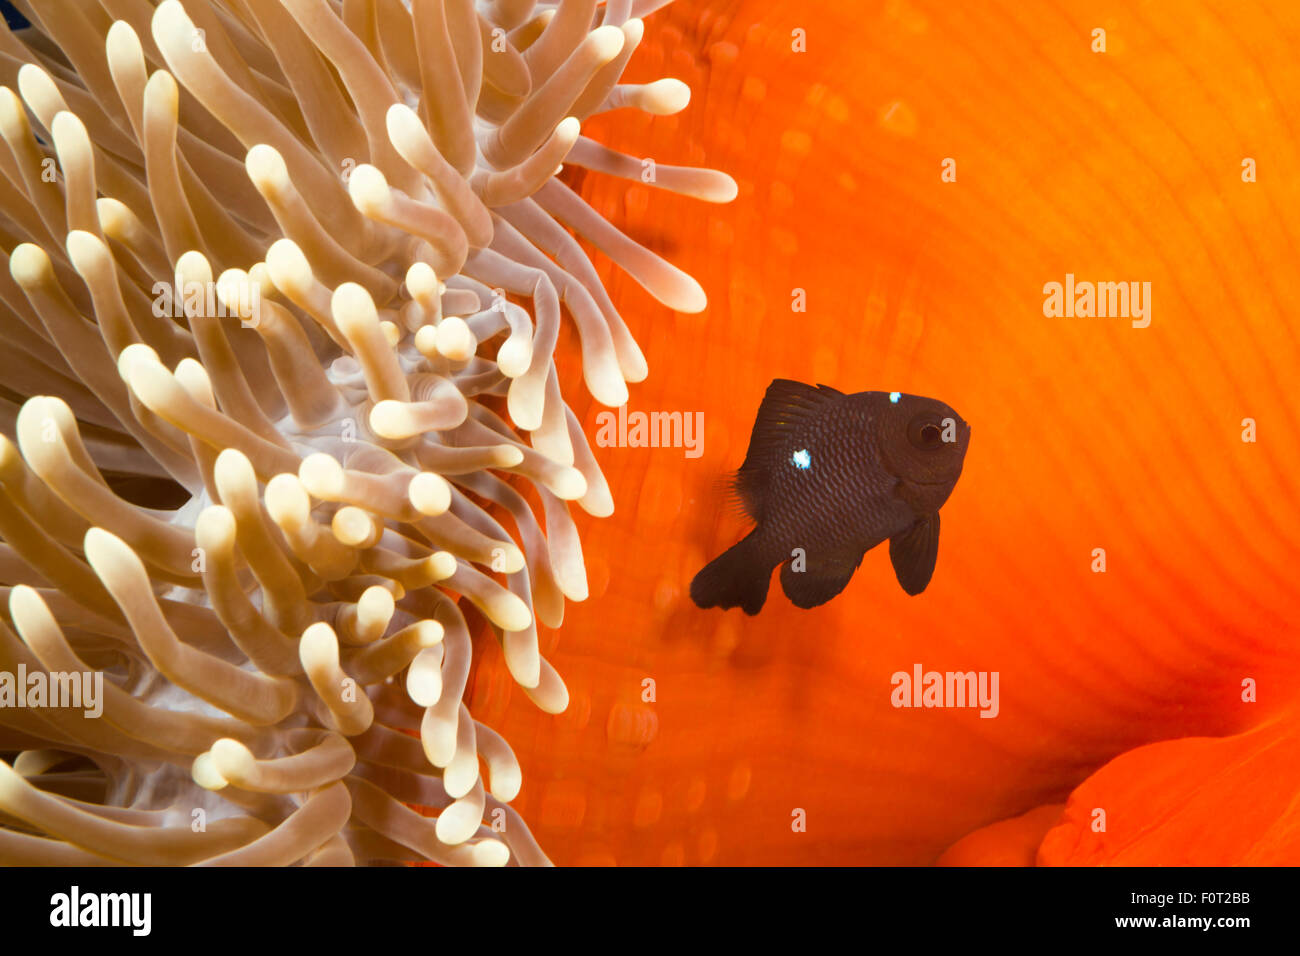 This juvenile three spot damselfish, Dascyllus trimaculatus, is pictured beside the anemone that is utilizes for protection.  As Stock Photo